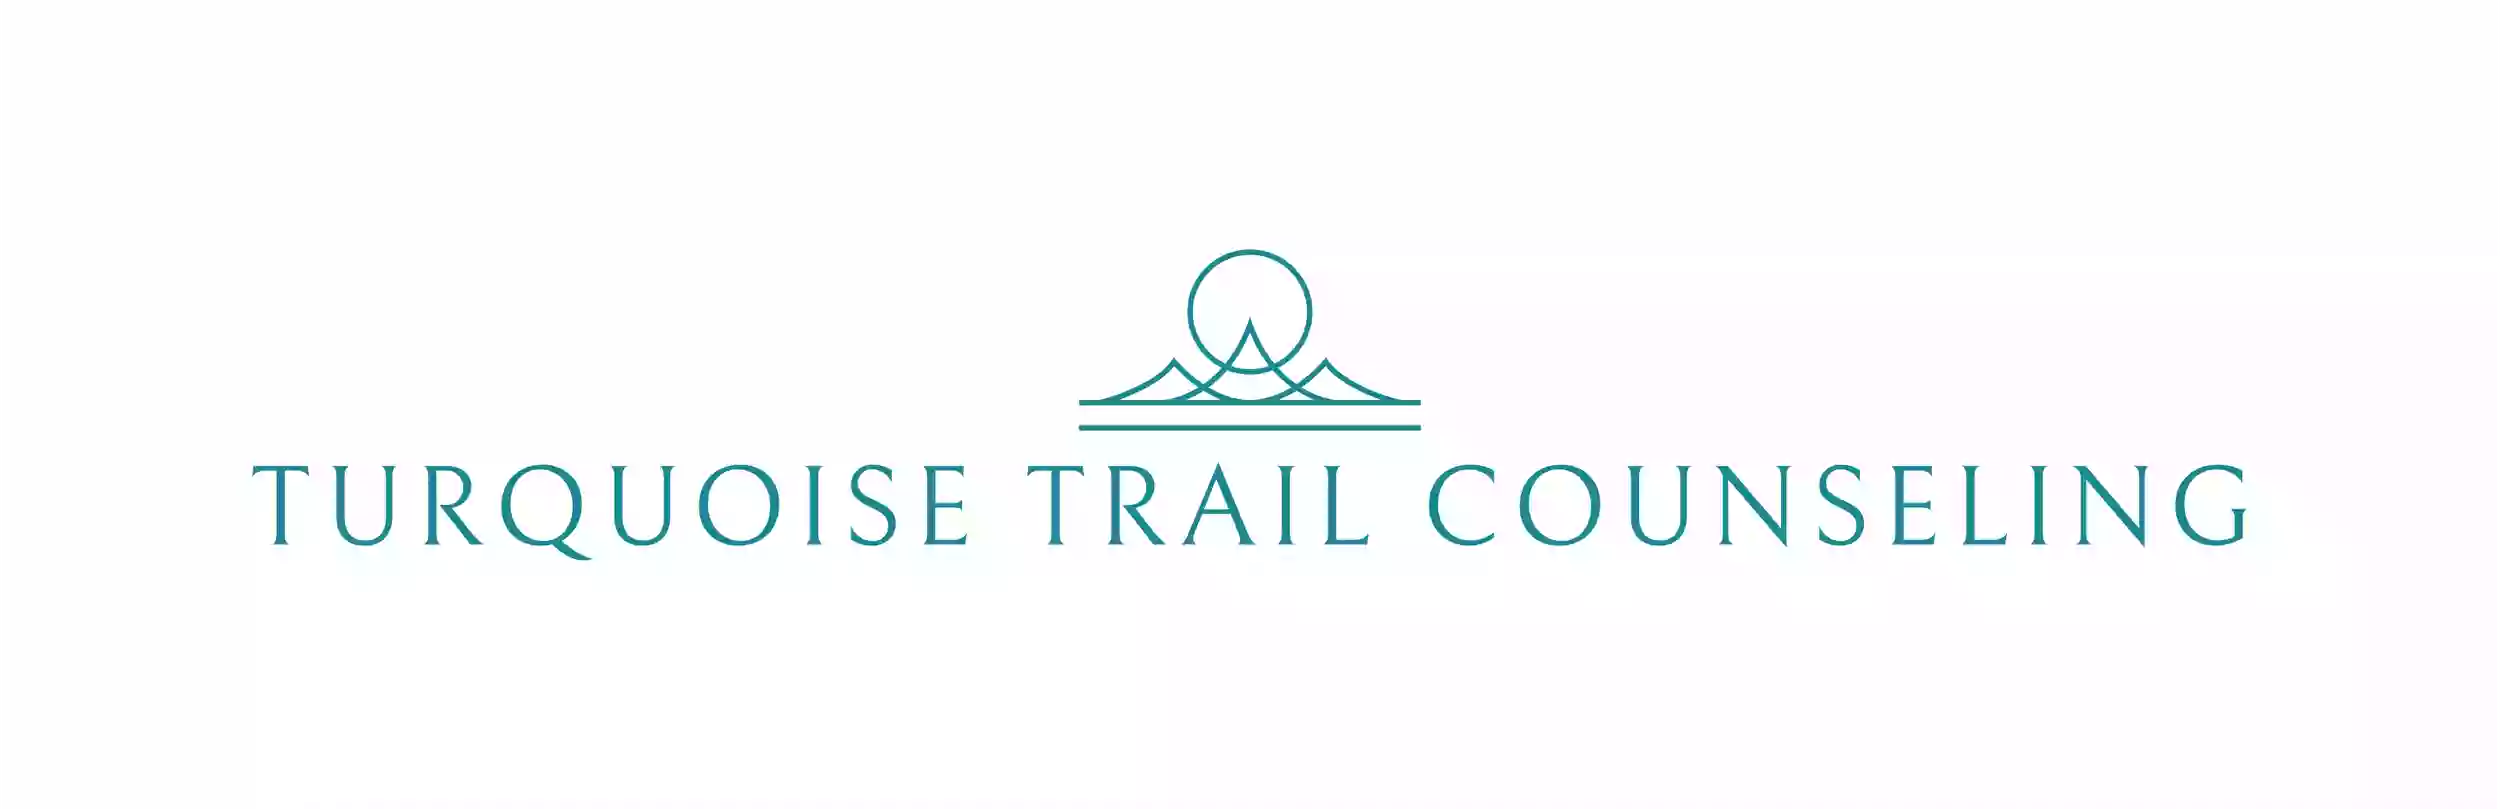 Turquoise Trail Counseling